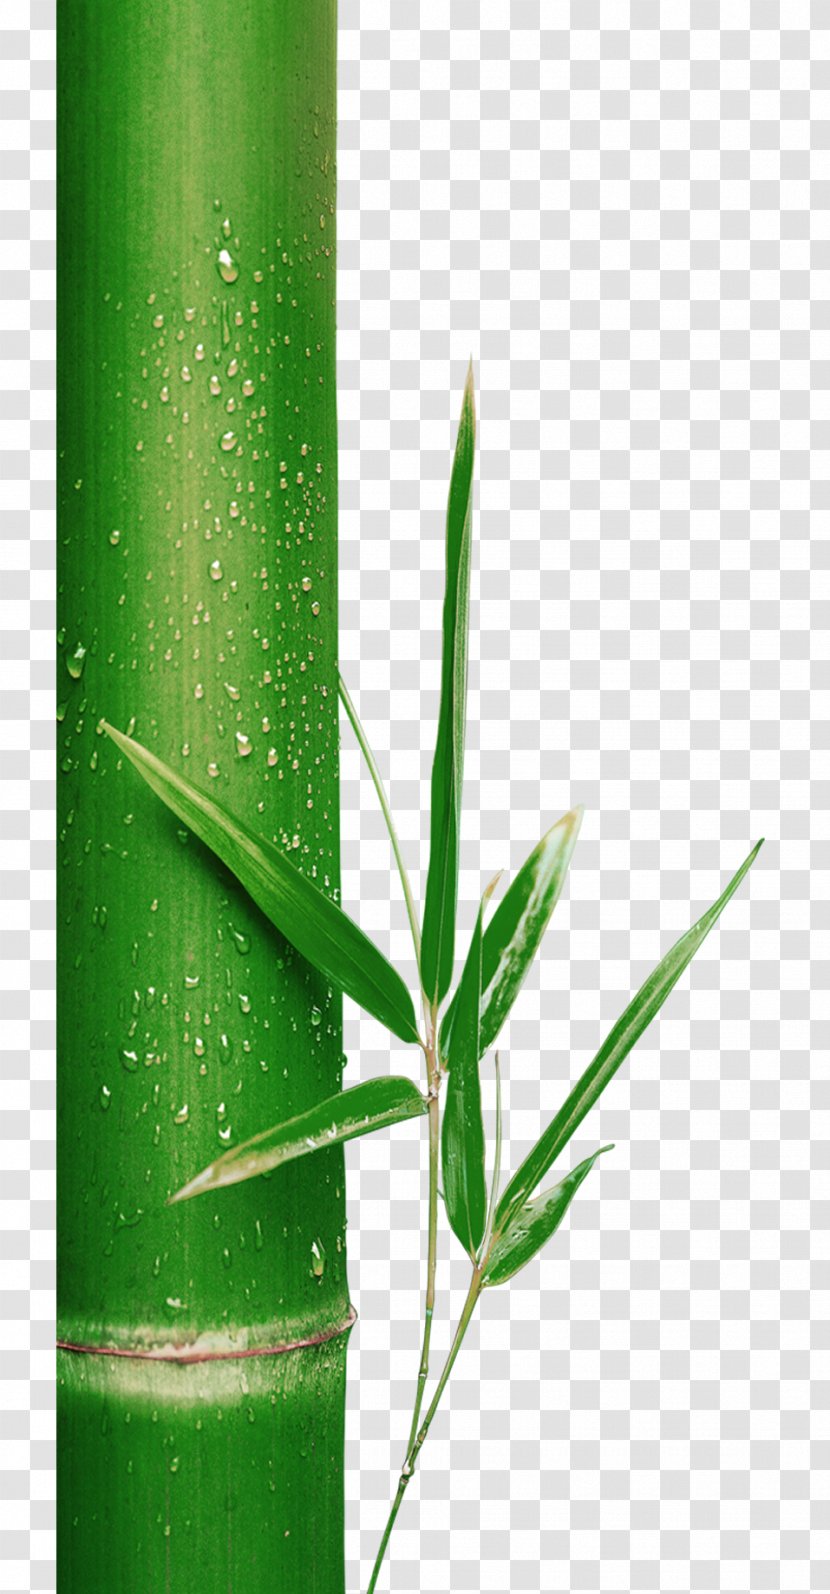 Bamboo Bamboe Leaf Green Transparent PNG